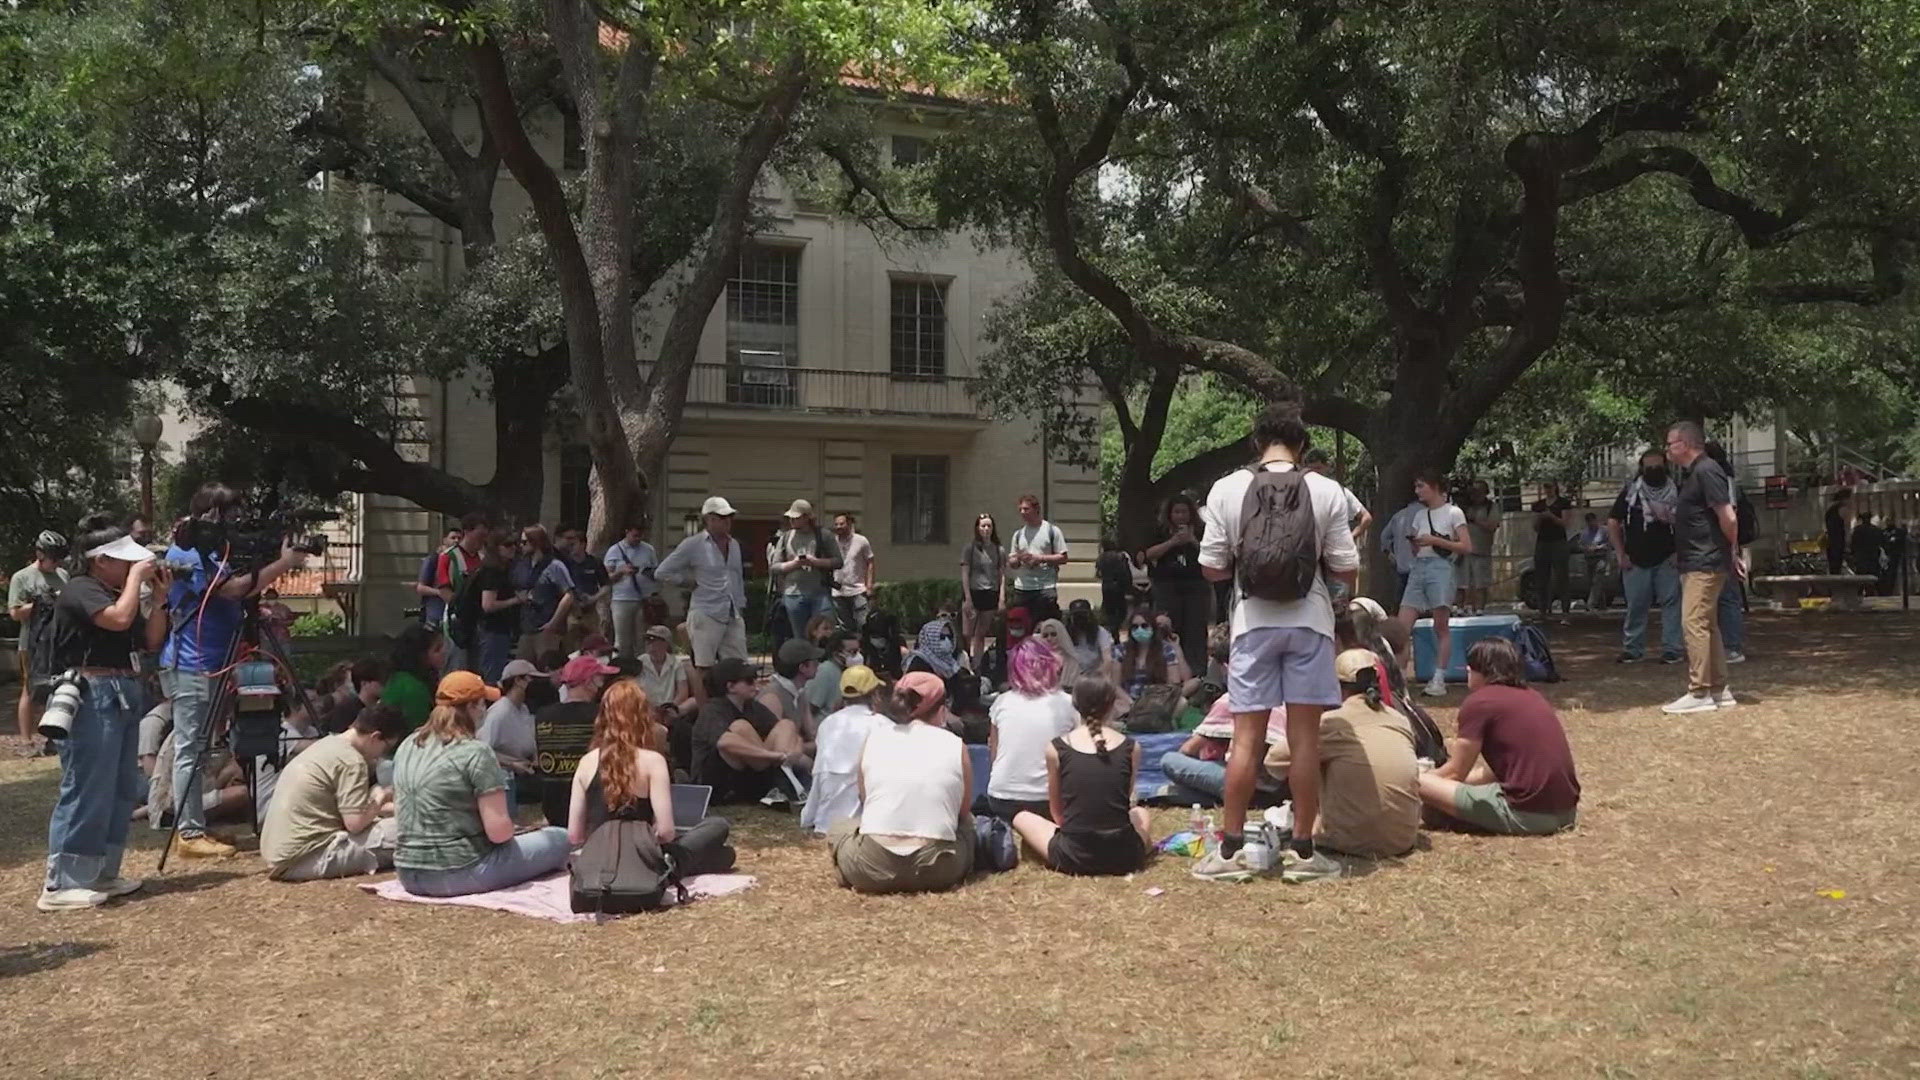 UT Austin protesters, like many nationwide, are upset at Israel for the 30,000 civilian deaths in Gaza.